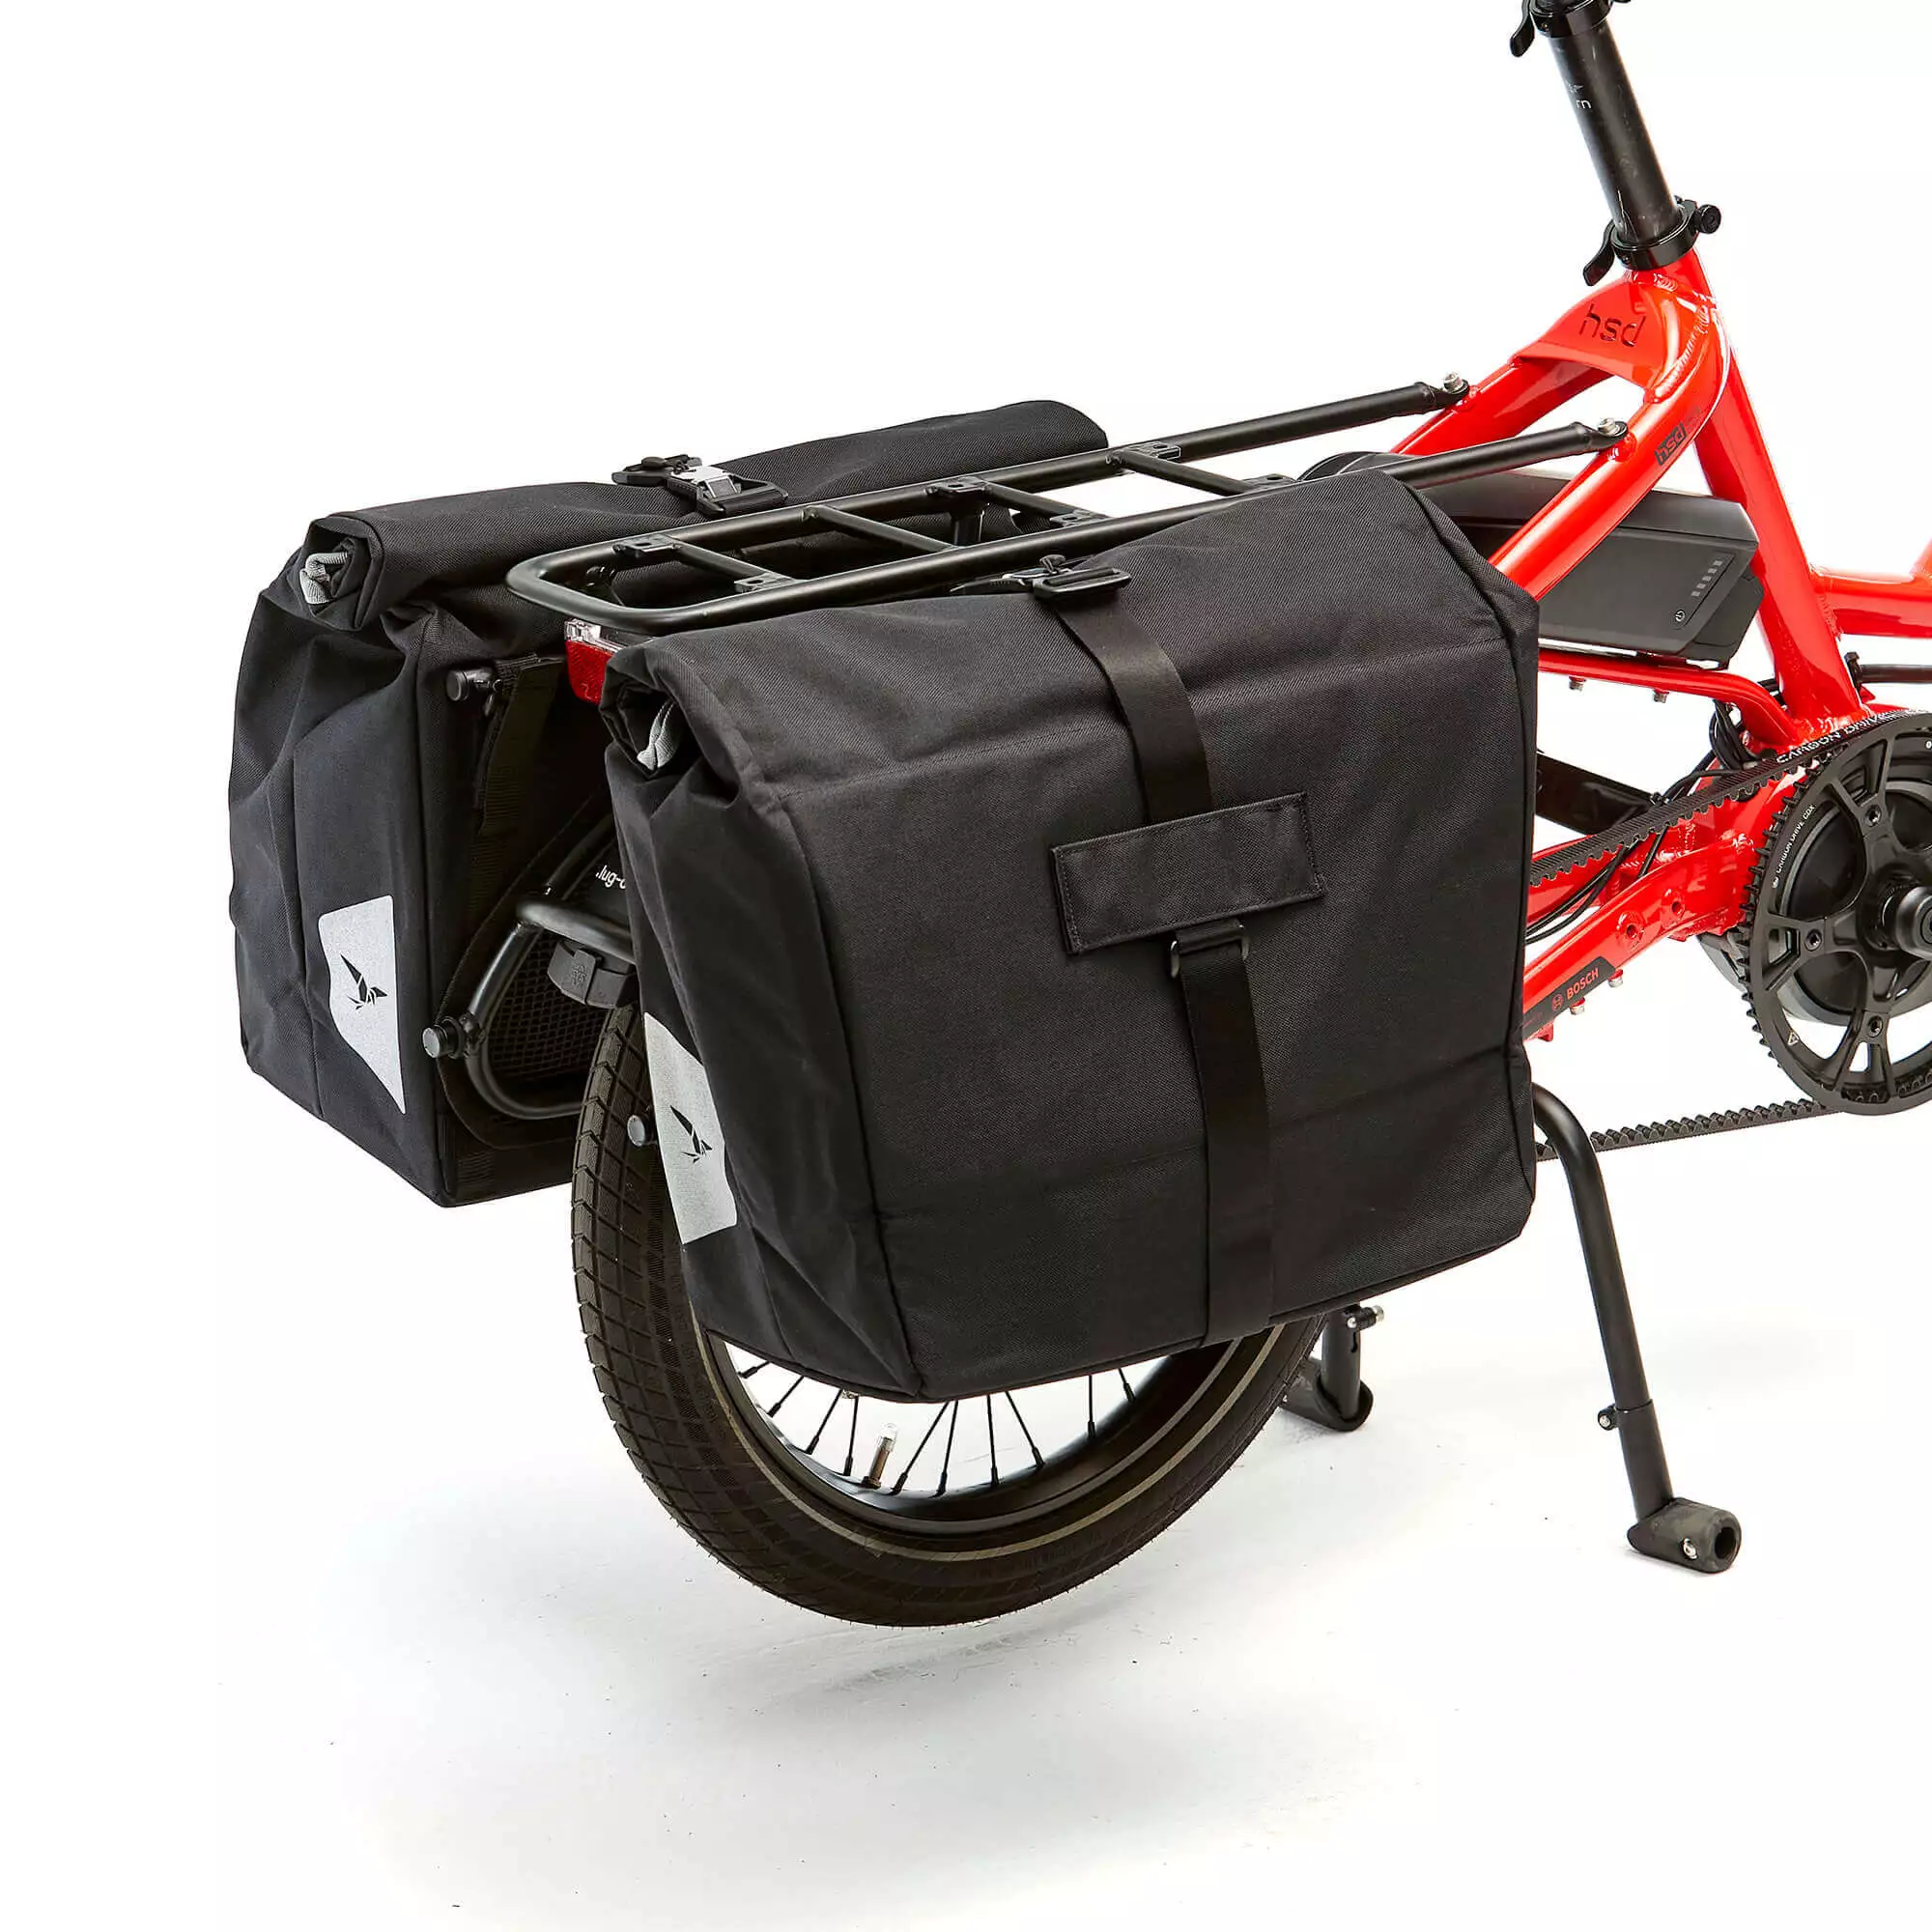 The Tern Cargo Hold 37 Panniers are a set of high-quality bike bags that provide ample storage space for your belongings during your cycling adventures. Designed to fit securely on your bike's rear rack, these panniers offer a combined capacity of 37 liters, making them ideal for longer trips or everyday commuting. With a rugged and water-resistant construction, these bags will protect your gear from the elements while on the road. Plus, they come with a variety of convenient features, including easy-access pockets, reflective details for added safety, and adjustable straps for a custom fit. Choose the Tern Cargo Hold 37 Panniers for a reliable and functional storage solution for your bike.